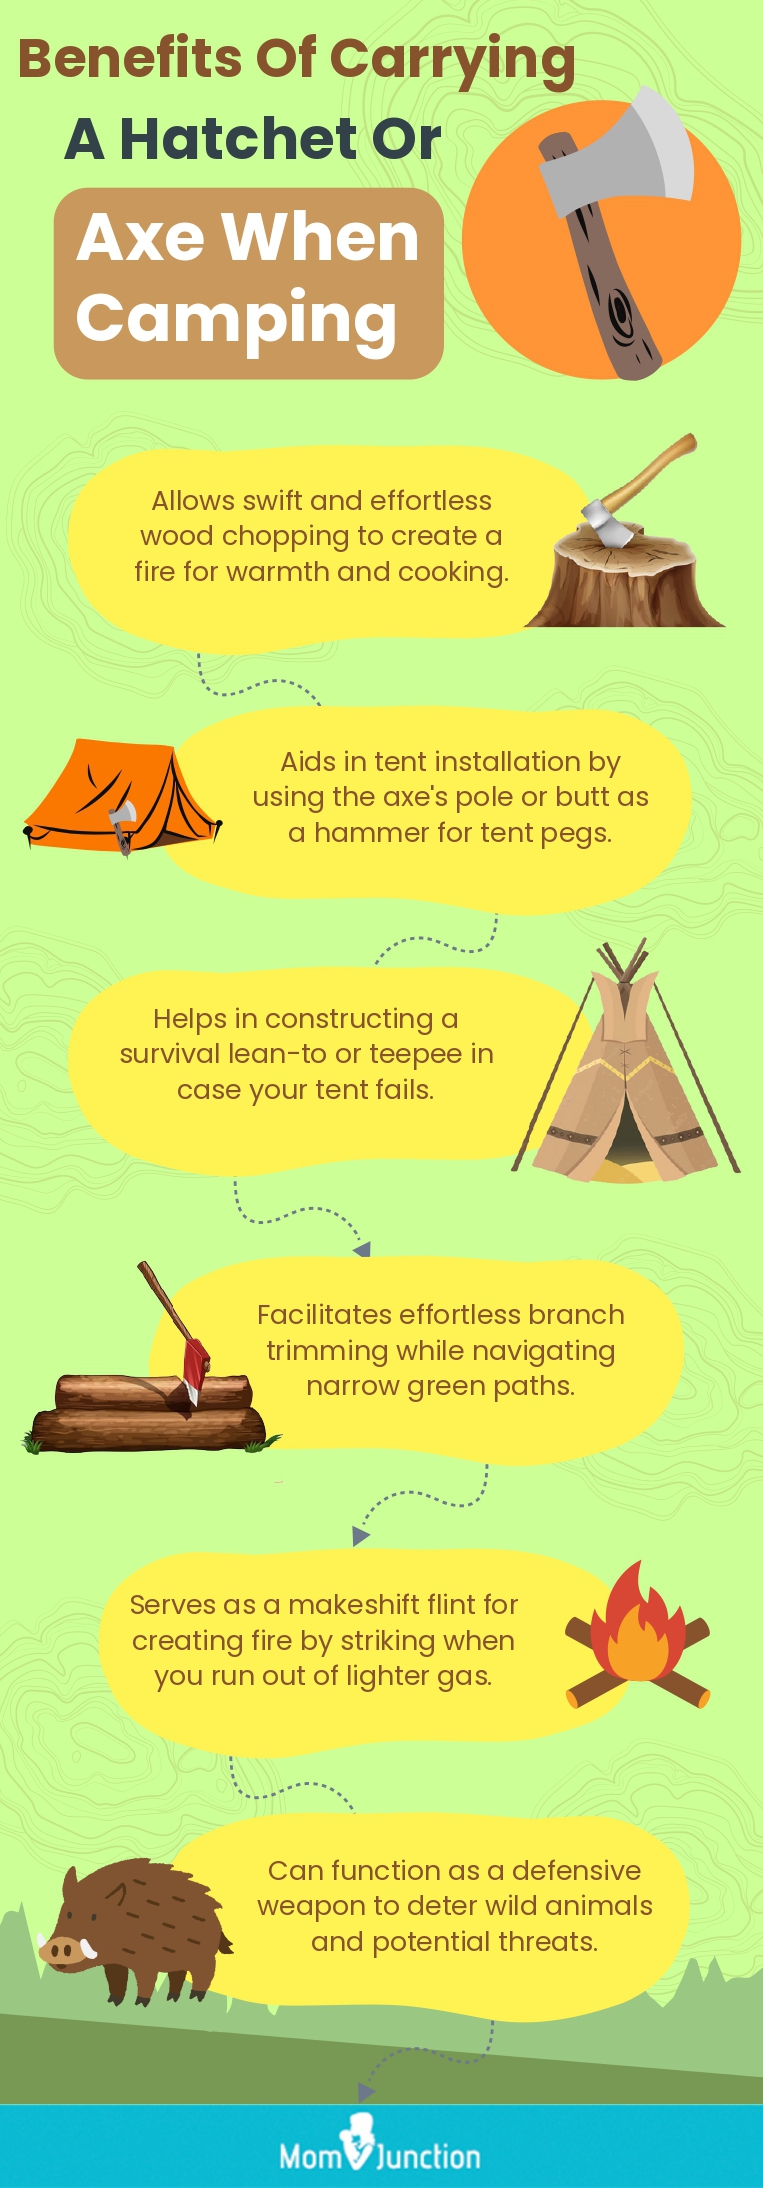 Benefits Of Carrying A Hatchet Or Axe When Camping (infographic)